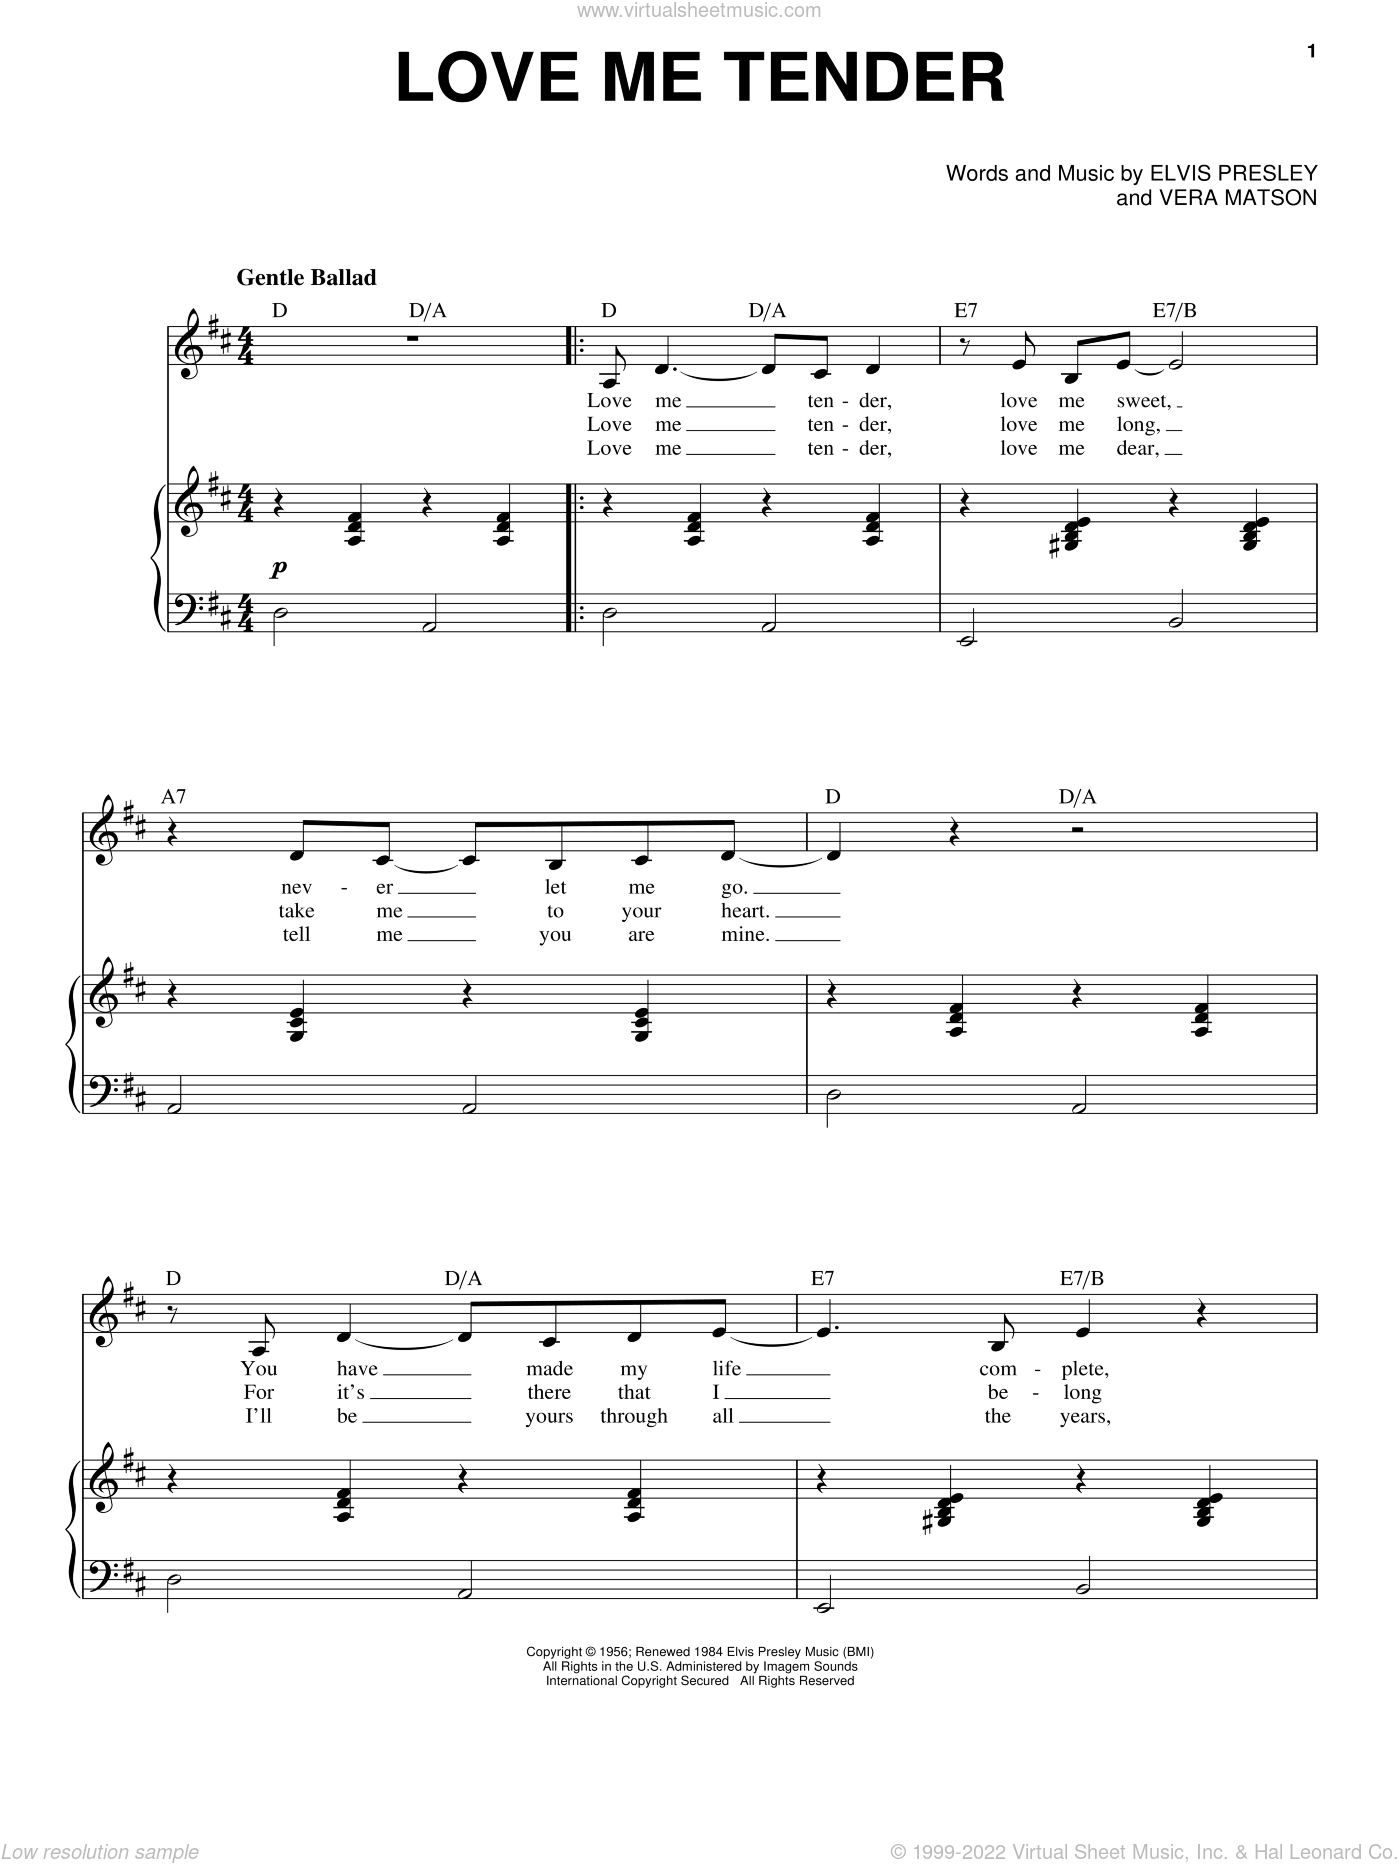 Presley Love Me Tender sheet music for voice and piano [PDF]